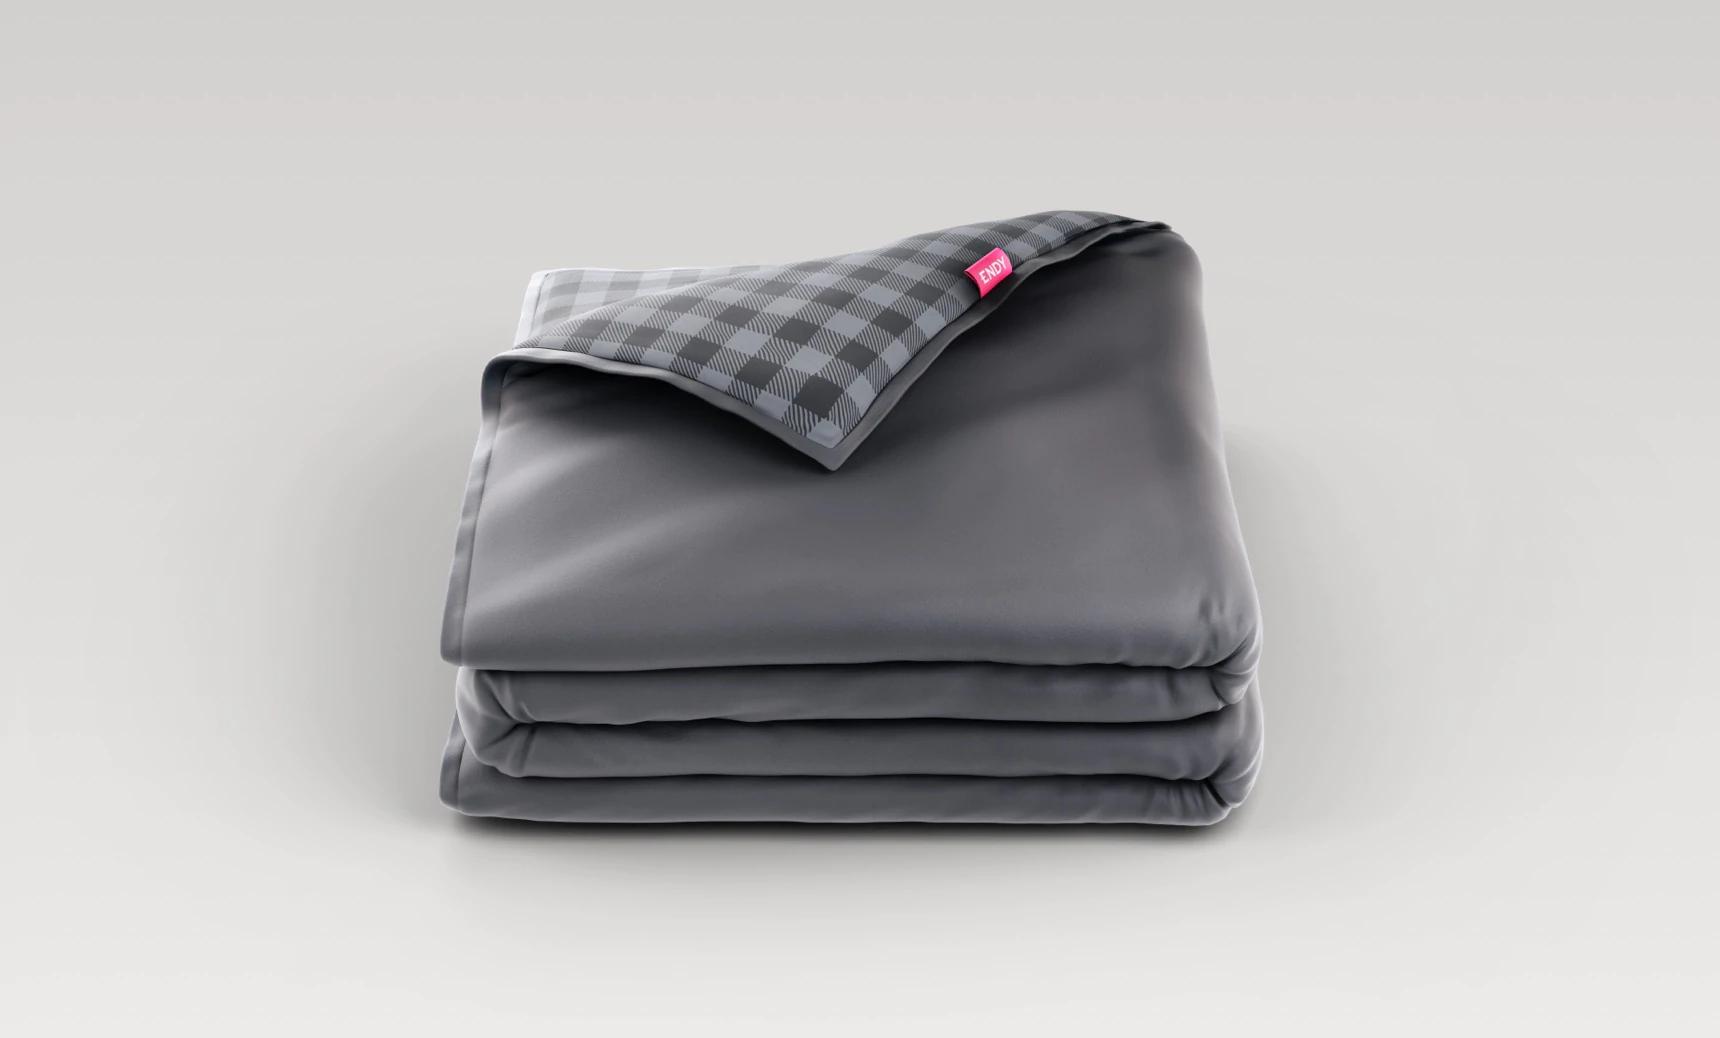 The Endy Weighted Blanket